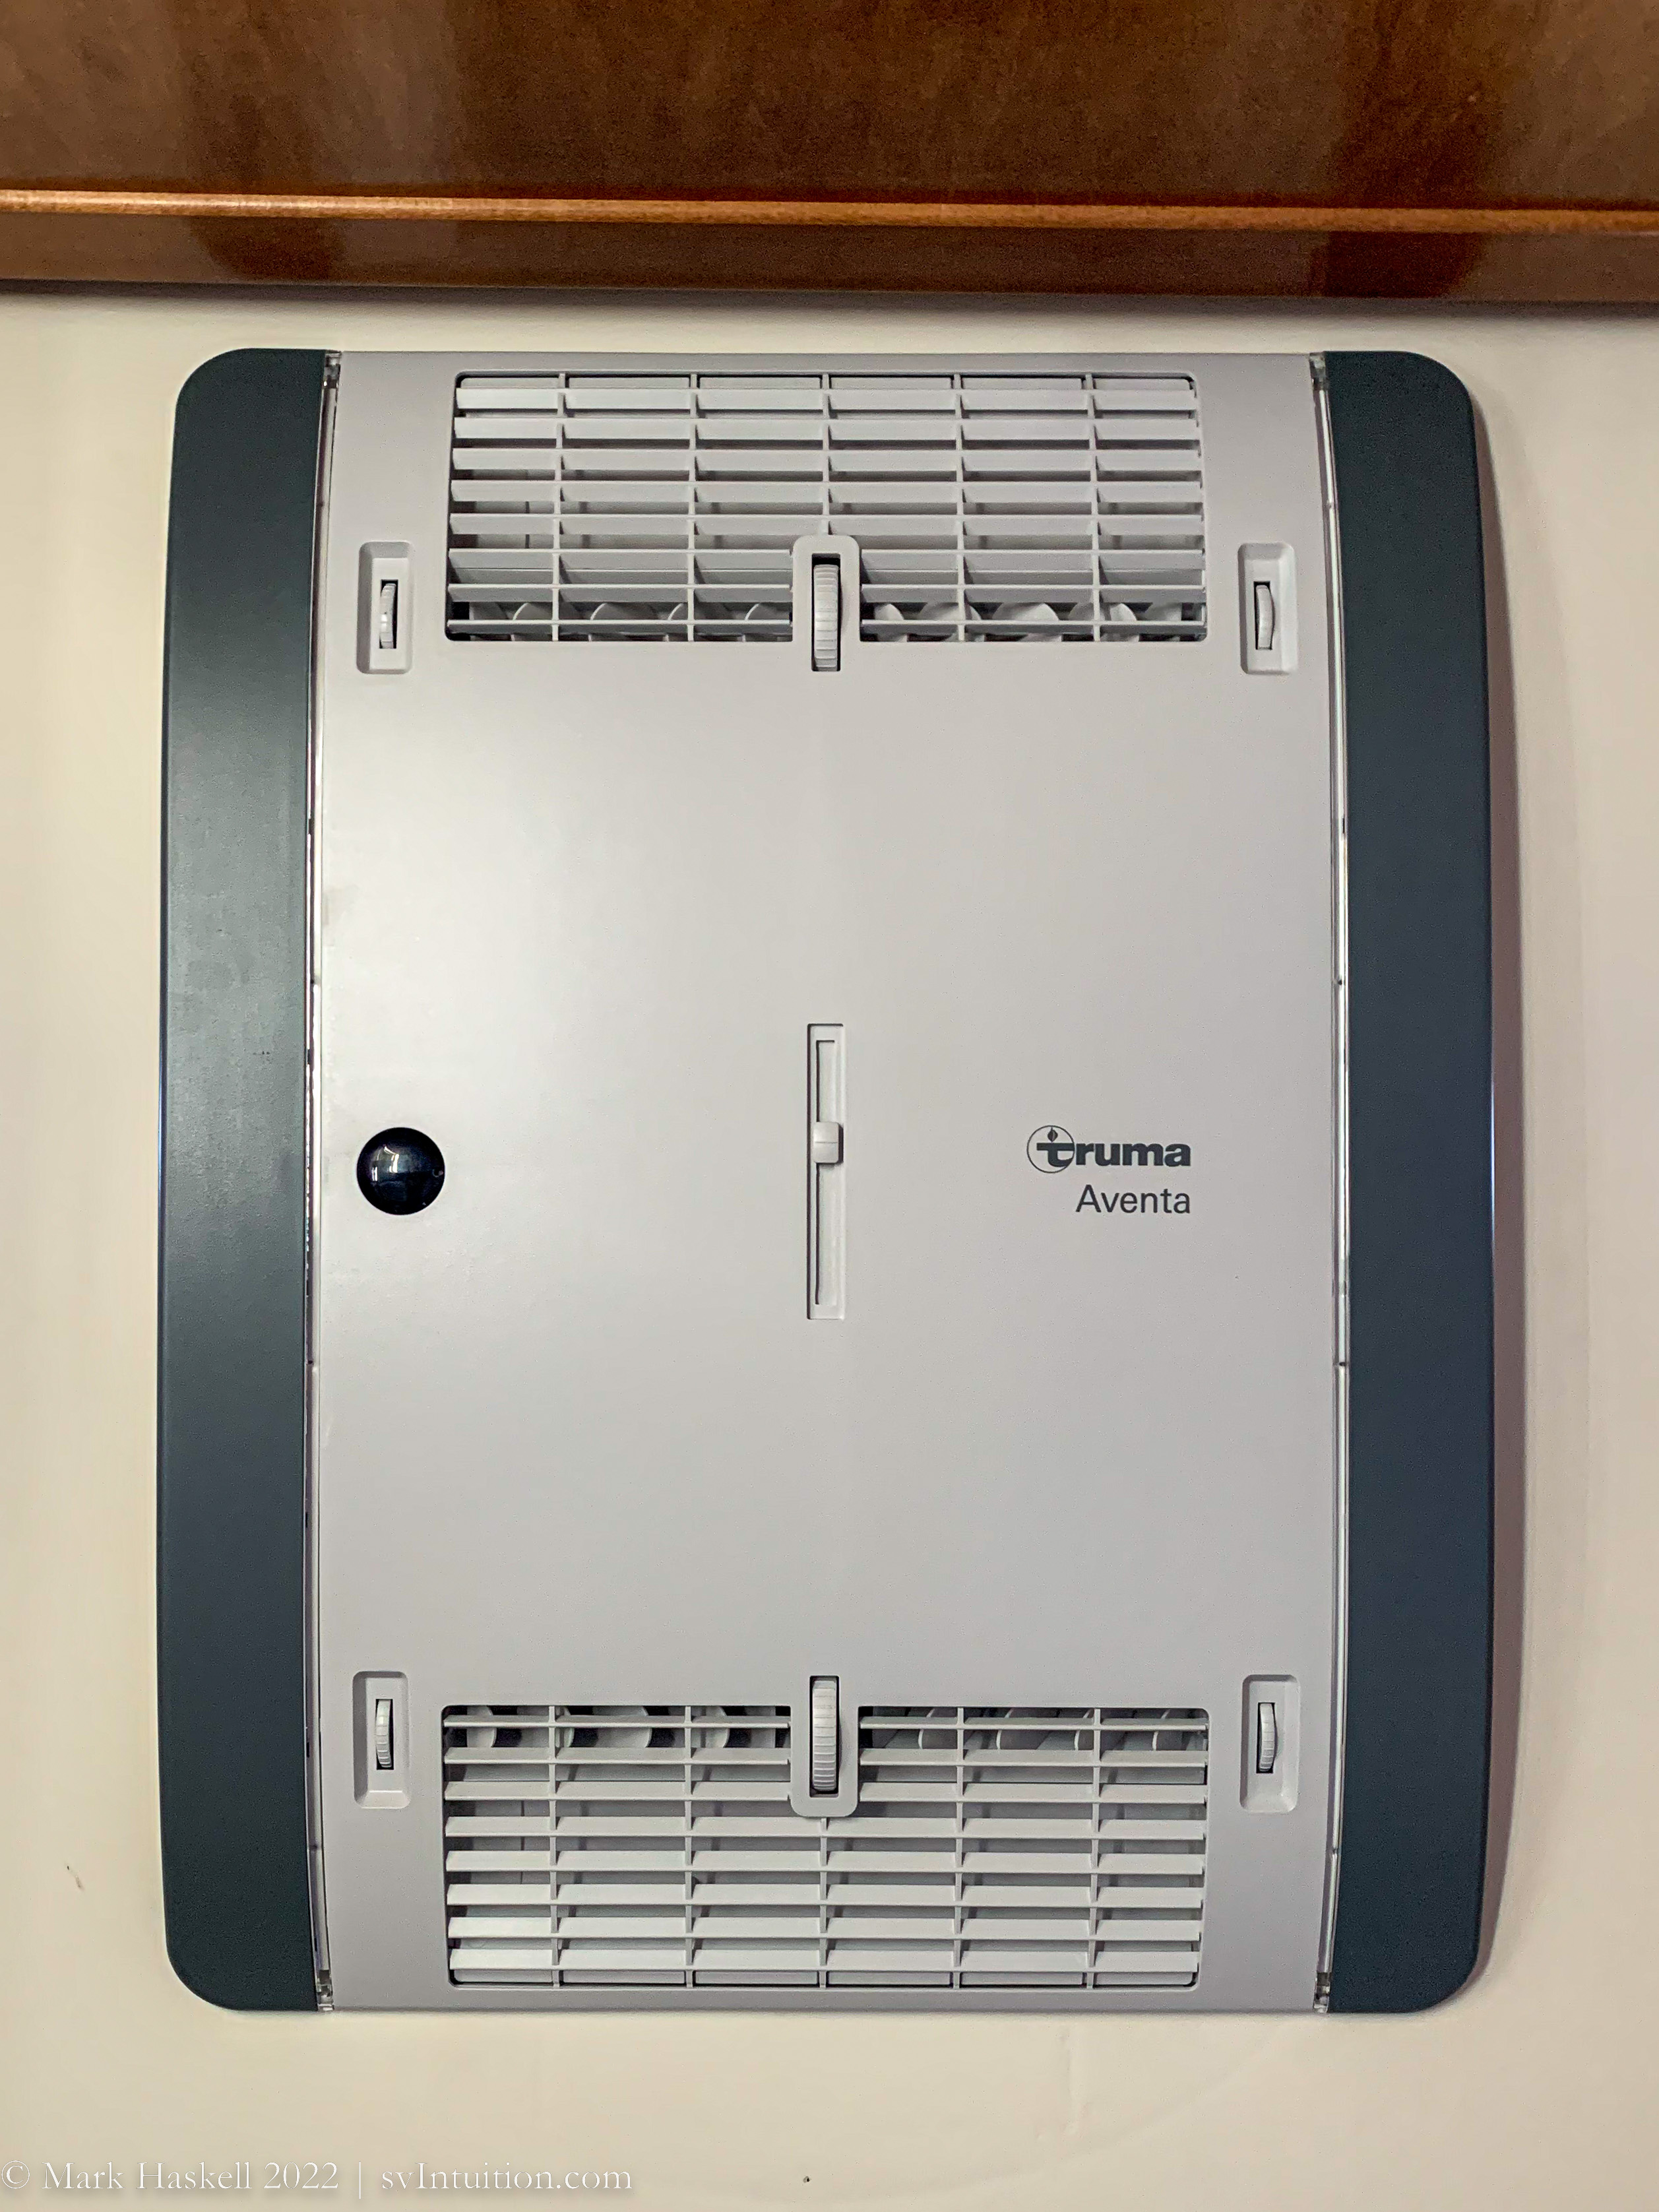 Truma Aventa A/C now available for aftermarket installations